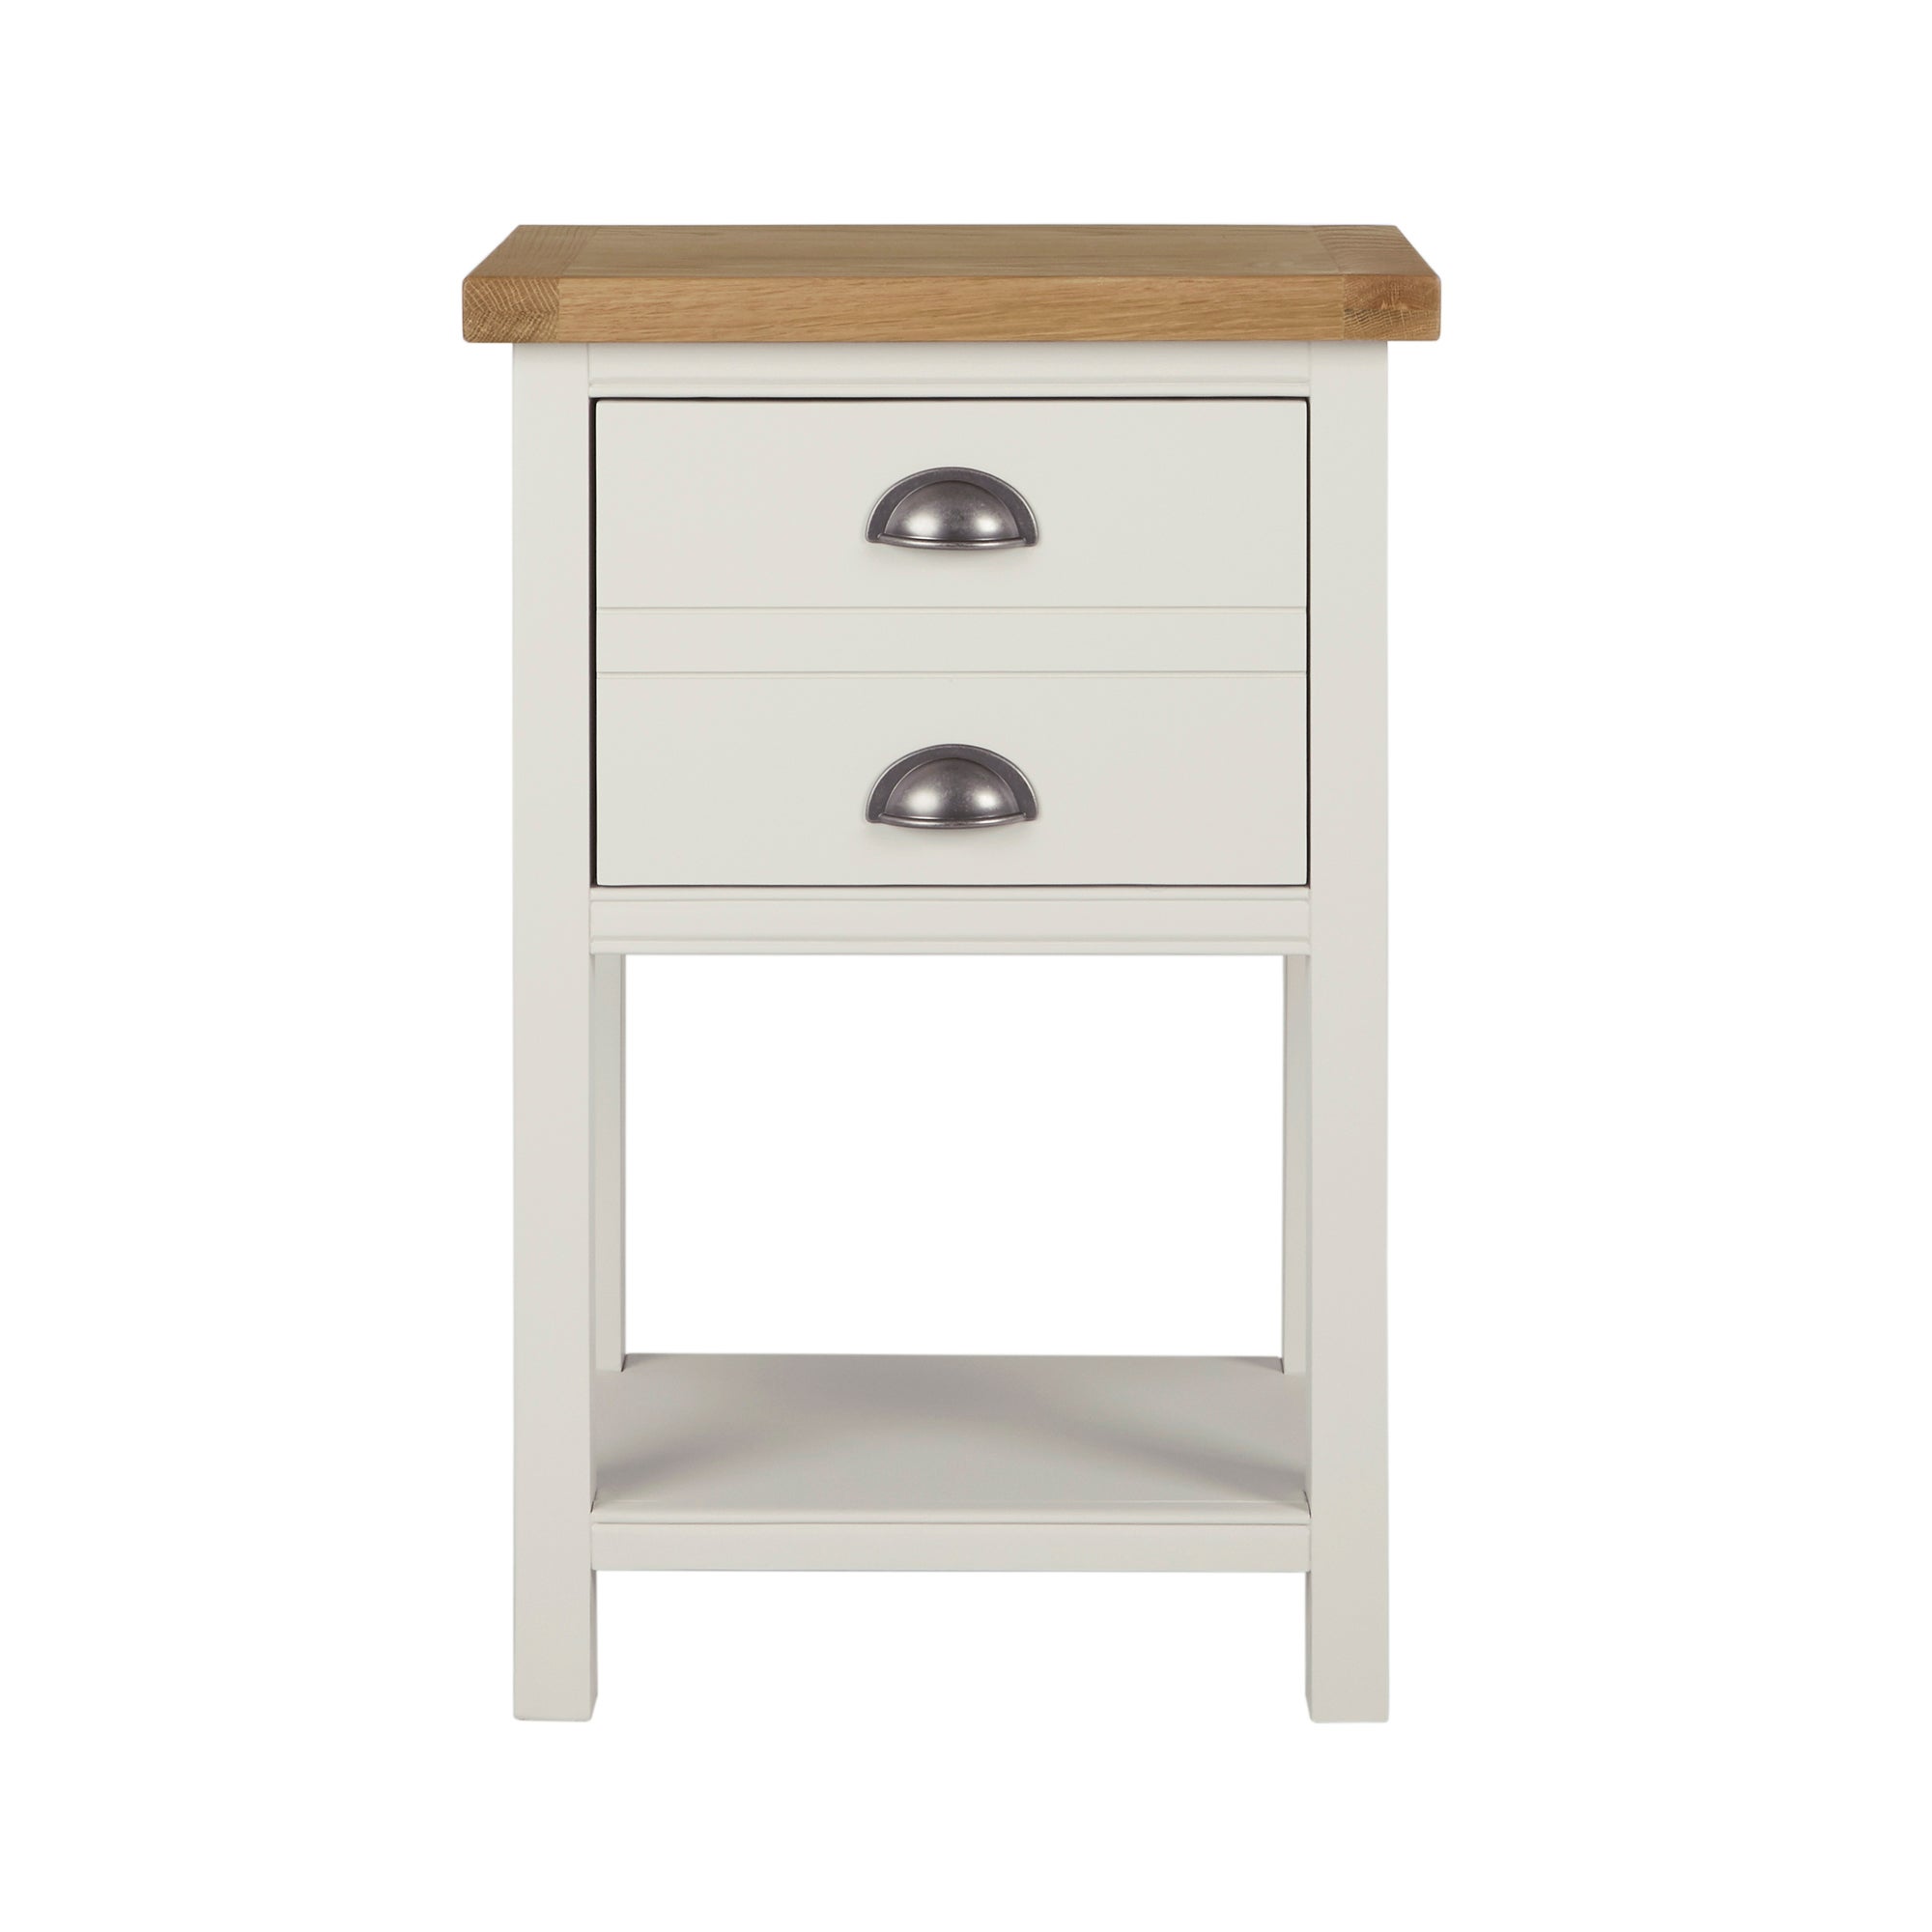 Compton Ivory Side Table Cream and Brown